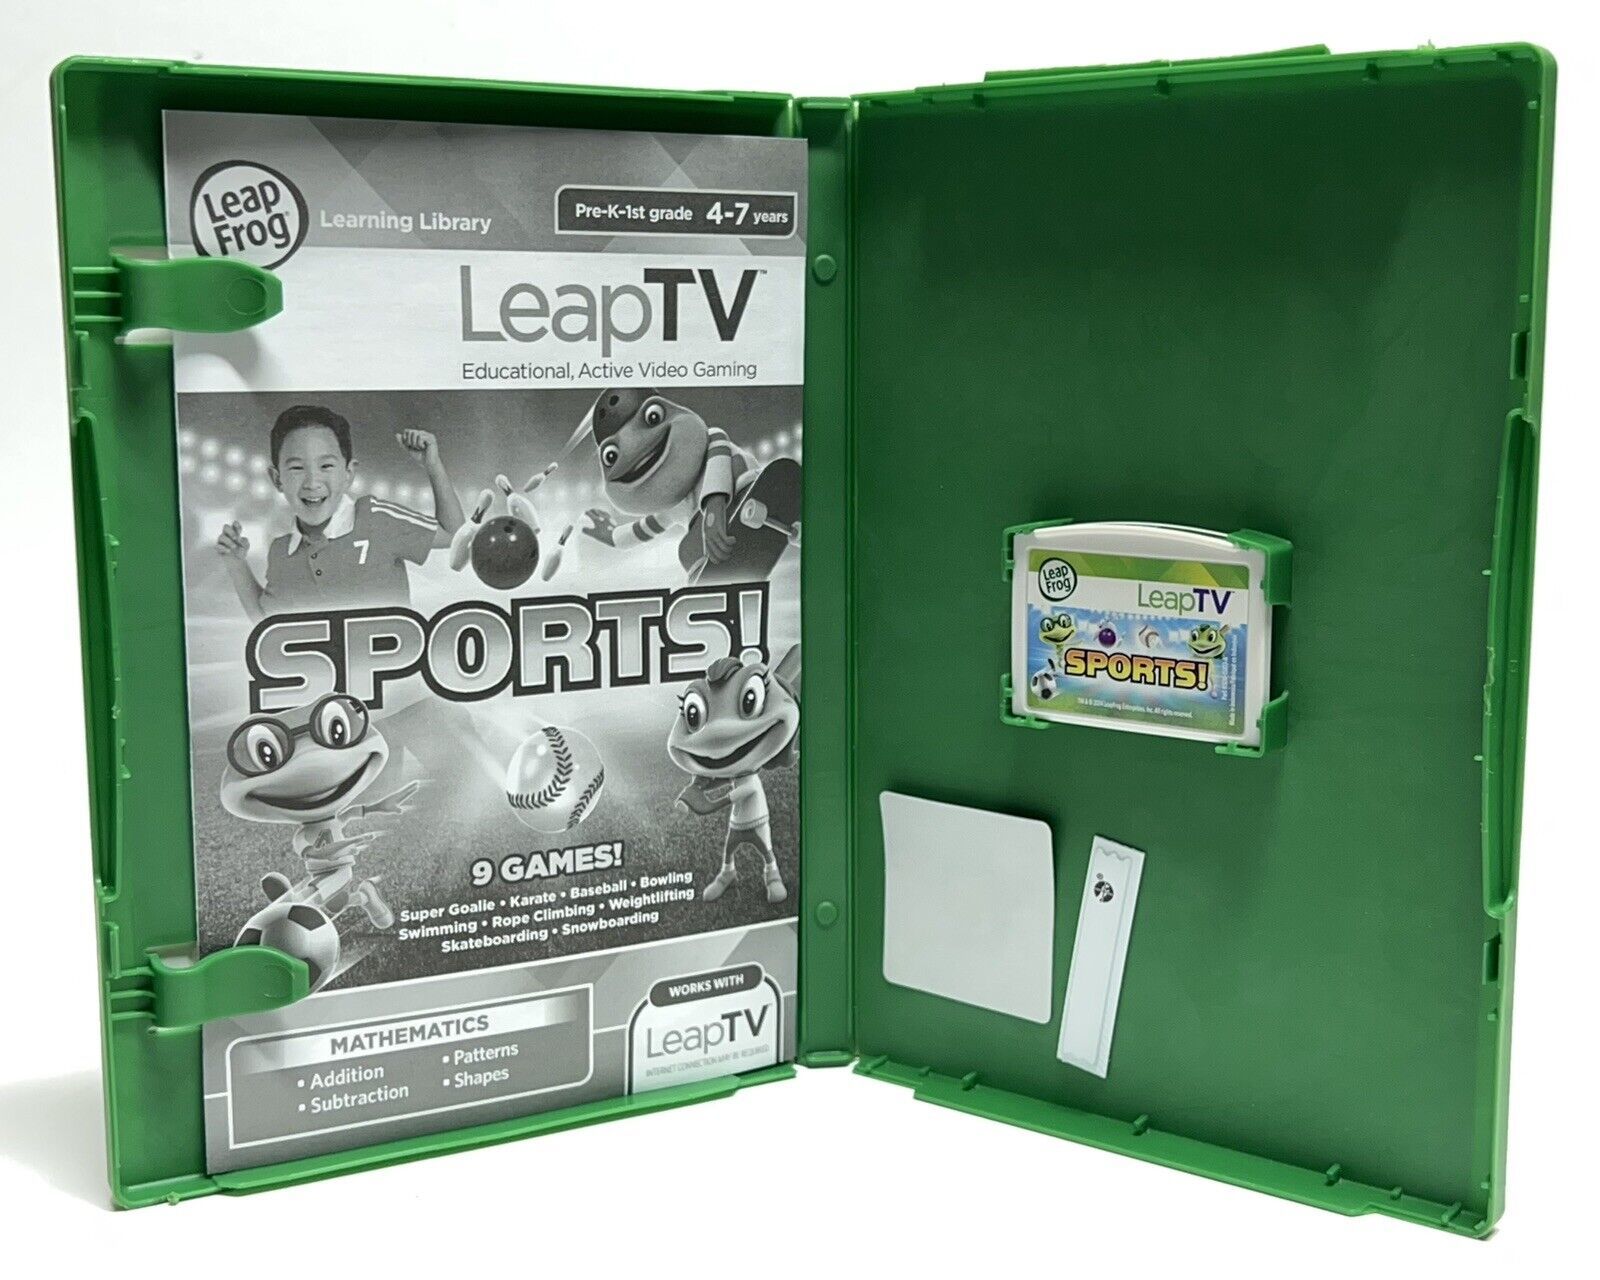 Leap Frog Leap TV Sports 9 Games Educational Game Pre K 1st Grade Video Game - $14.84